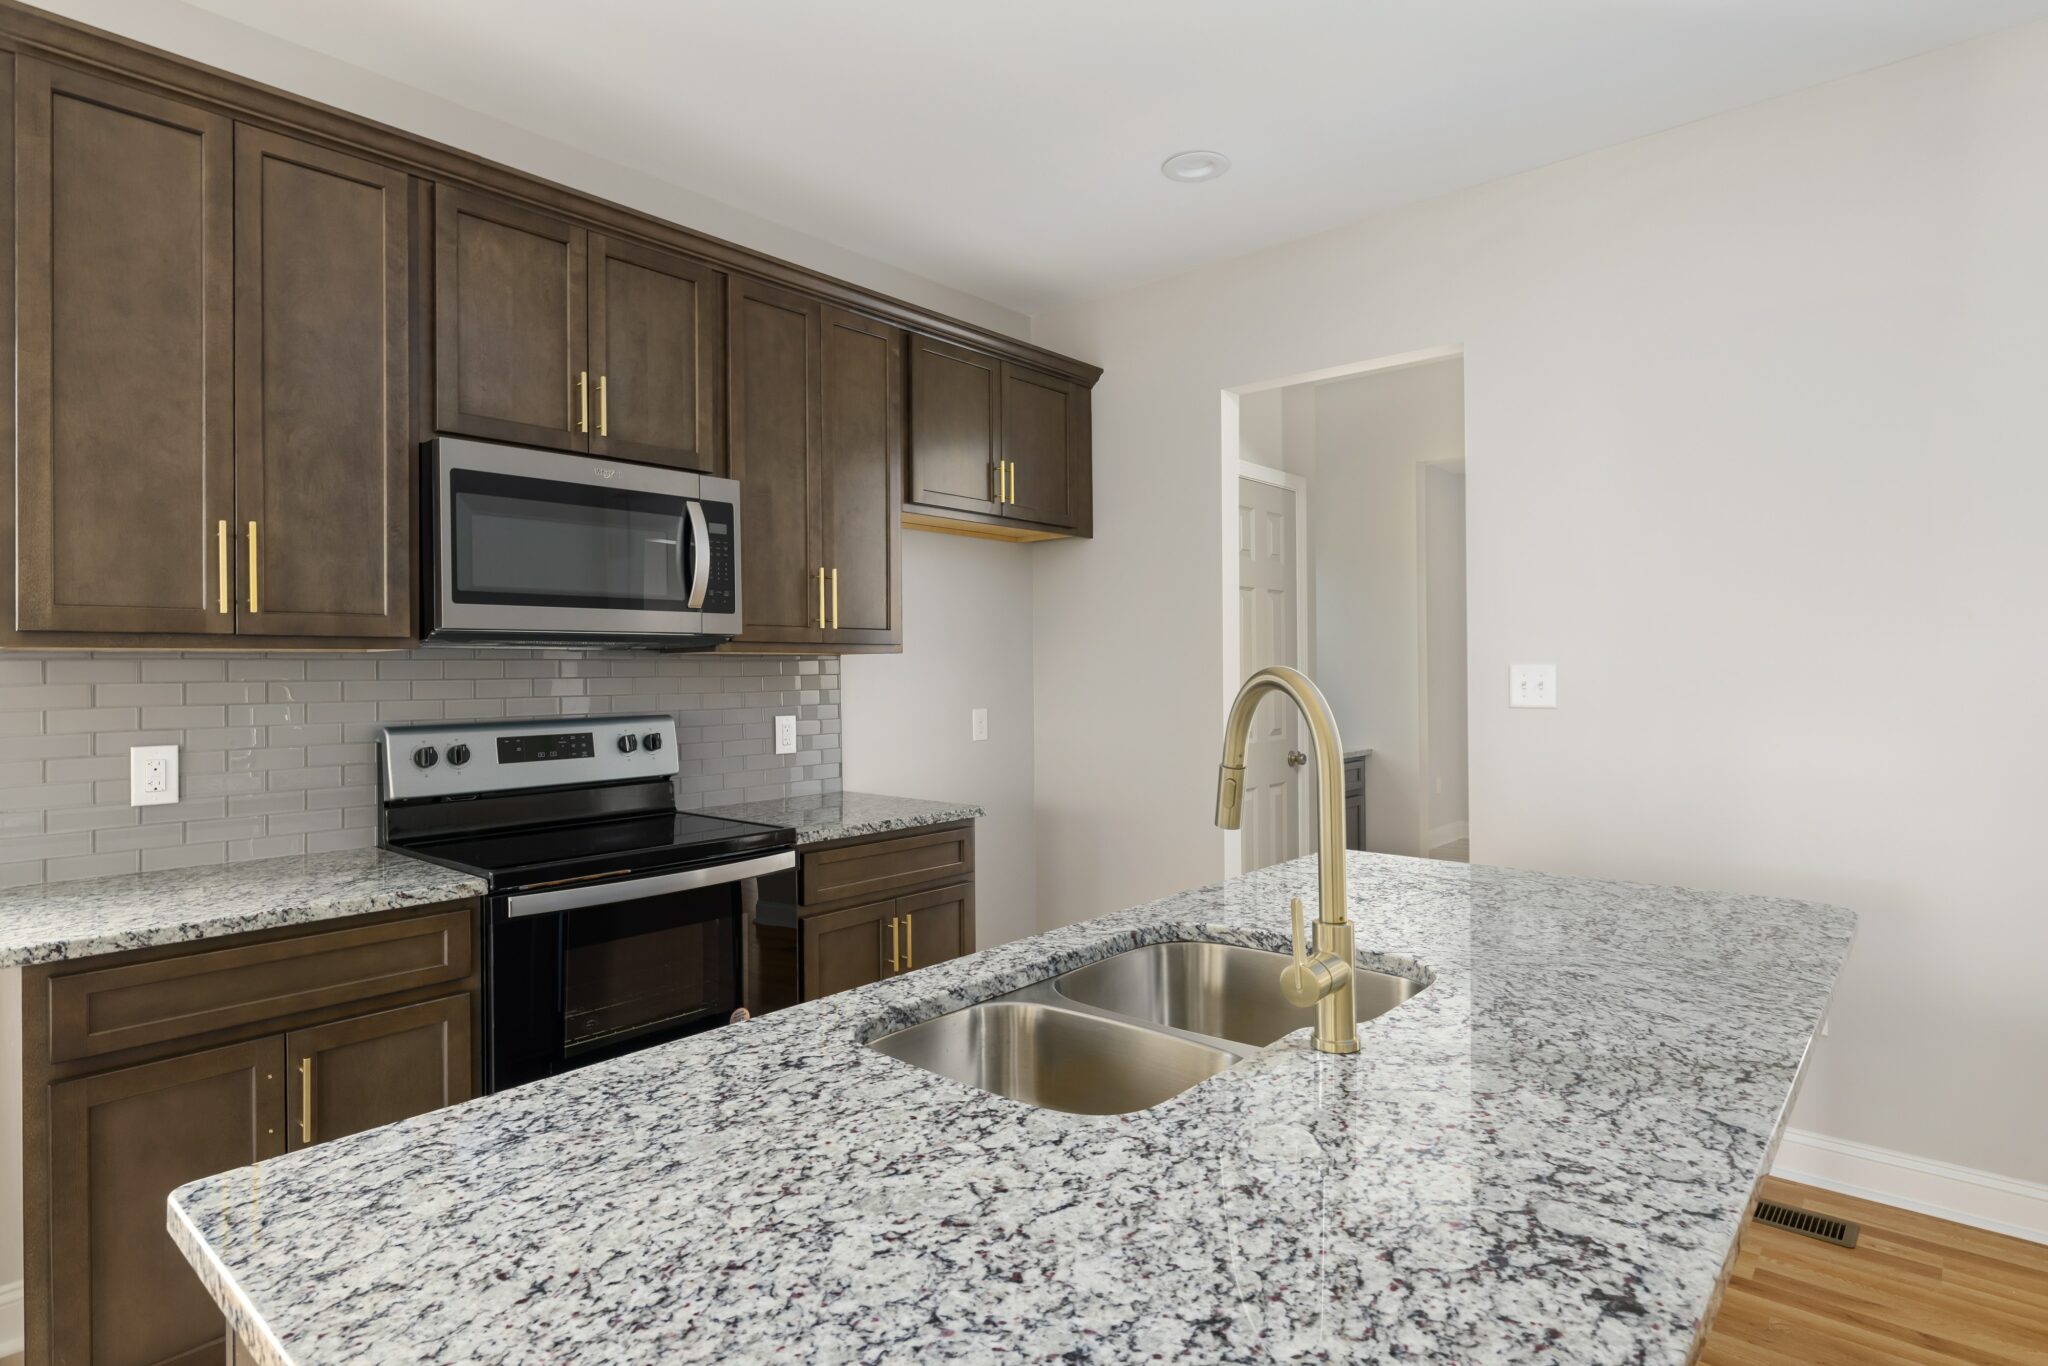 Pros and Cons of Granite Countertops